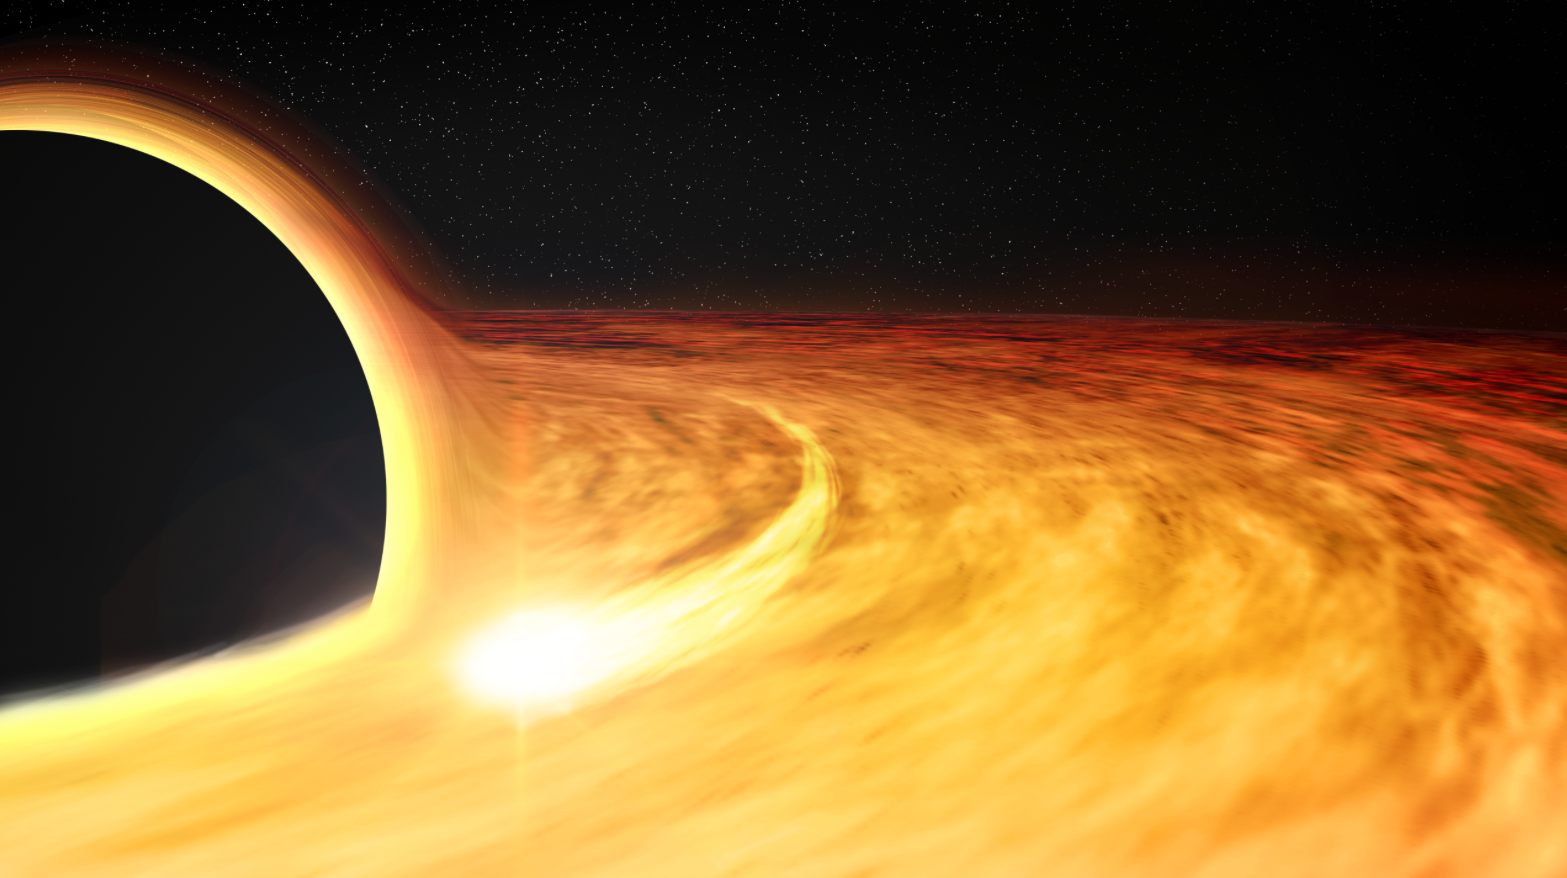 A Star Fell Into a Black Hole, Revealing Its Super-Fast Spin